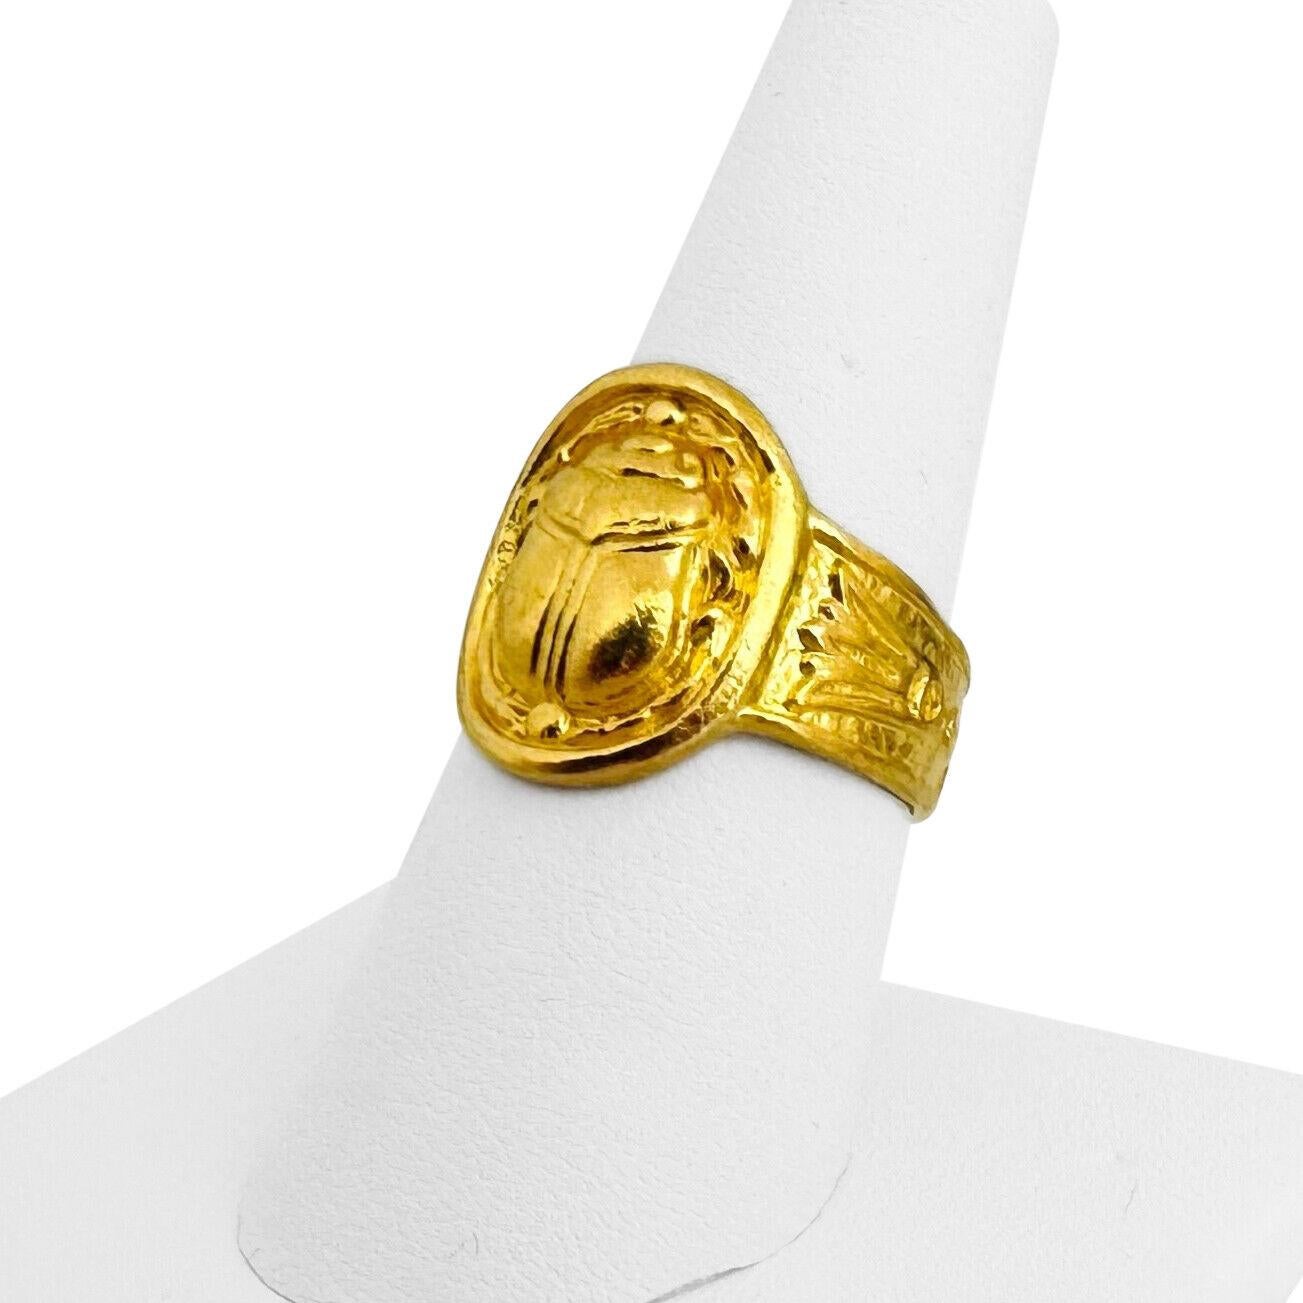 24k Pure Yellow Gold 14.4g Solid Scarab Beetle Ankh Ring Size 7

Condition:  Excellent Condition, Professionally Cleaned and Polished
Metal:  24k Gold (Marked, and Professionally Tested)
Weight:  14.4g
Width:  17.5mm at face, 6mm at back
Size: 